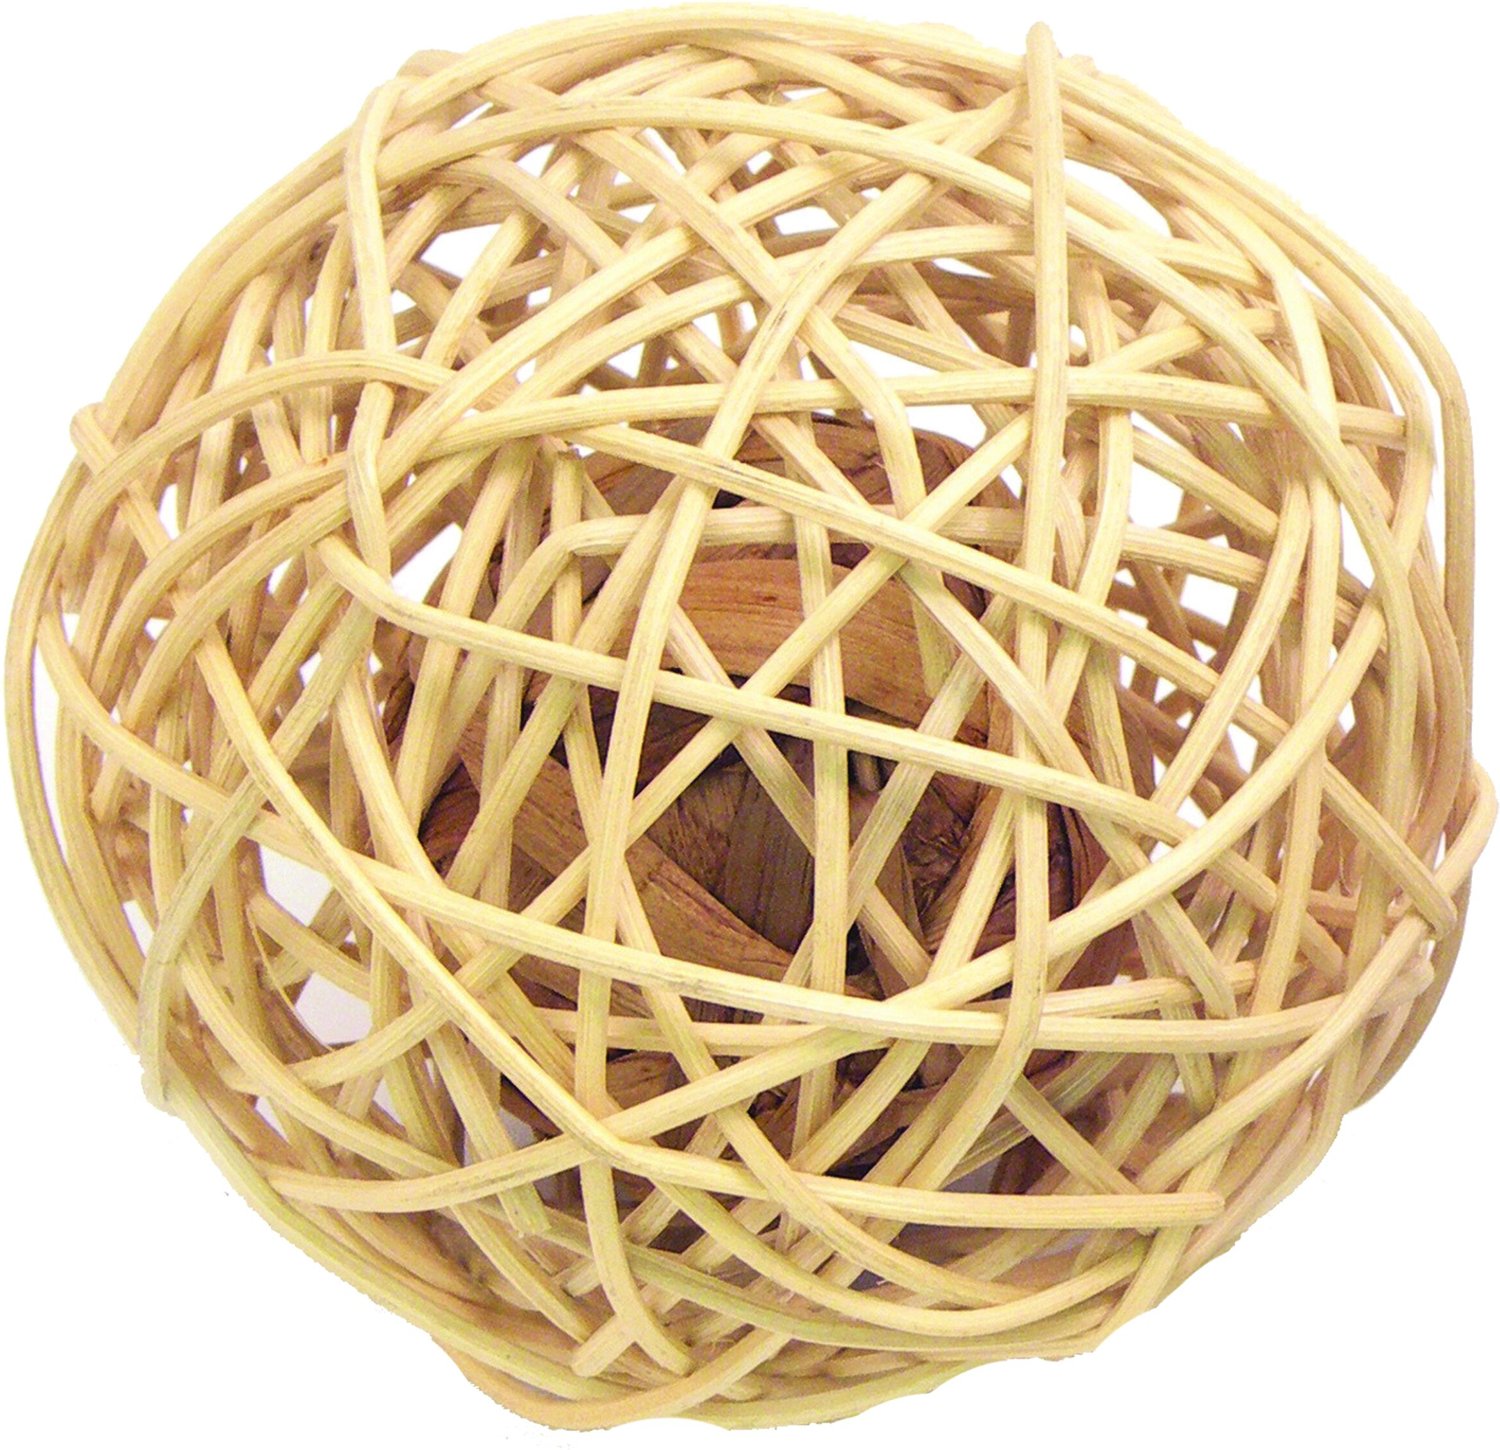 5. Naturals by Rosewood Rattan Wobble Ball Small Pet Toy